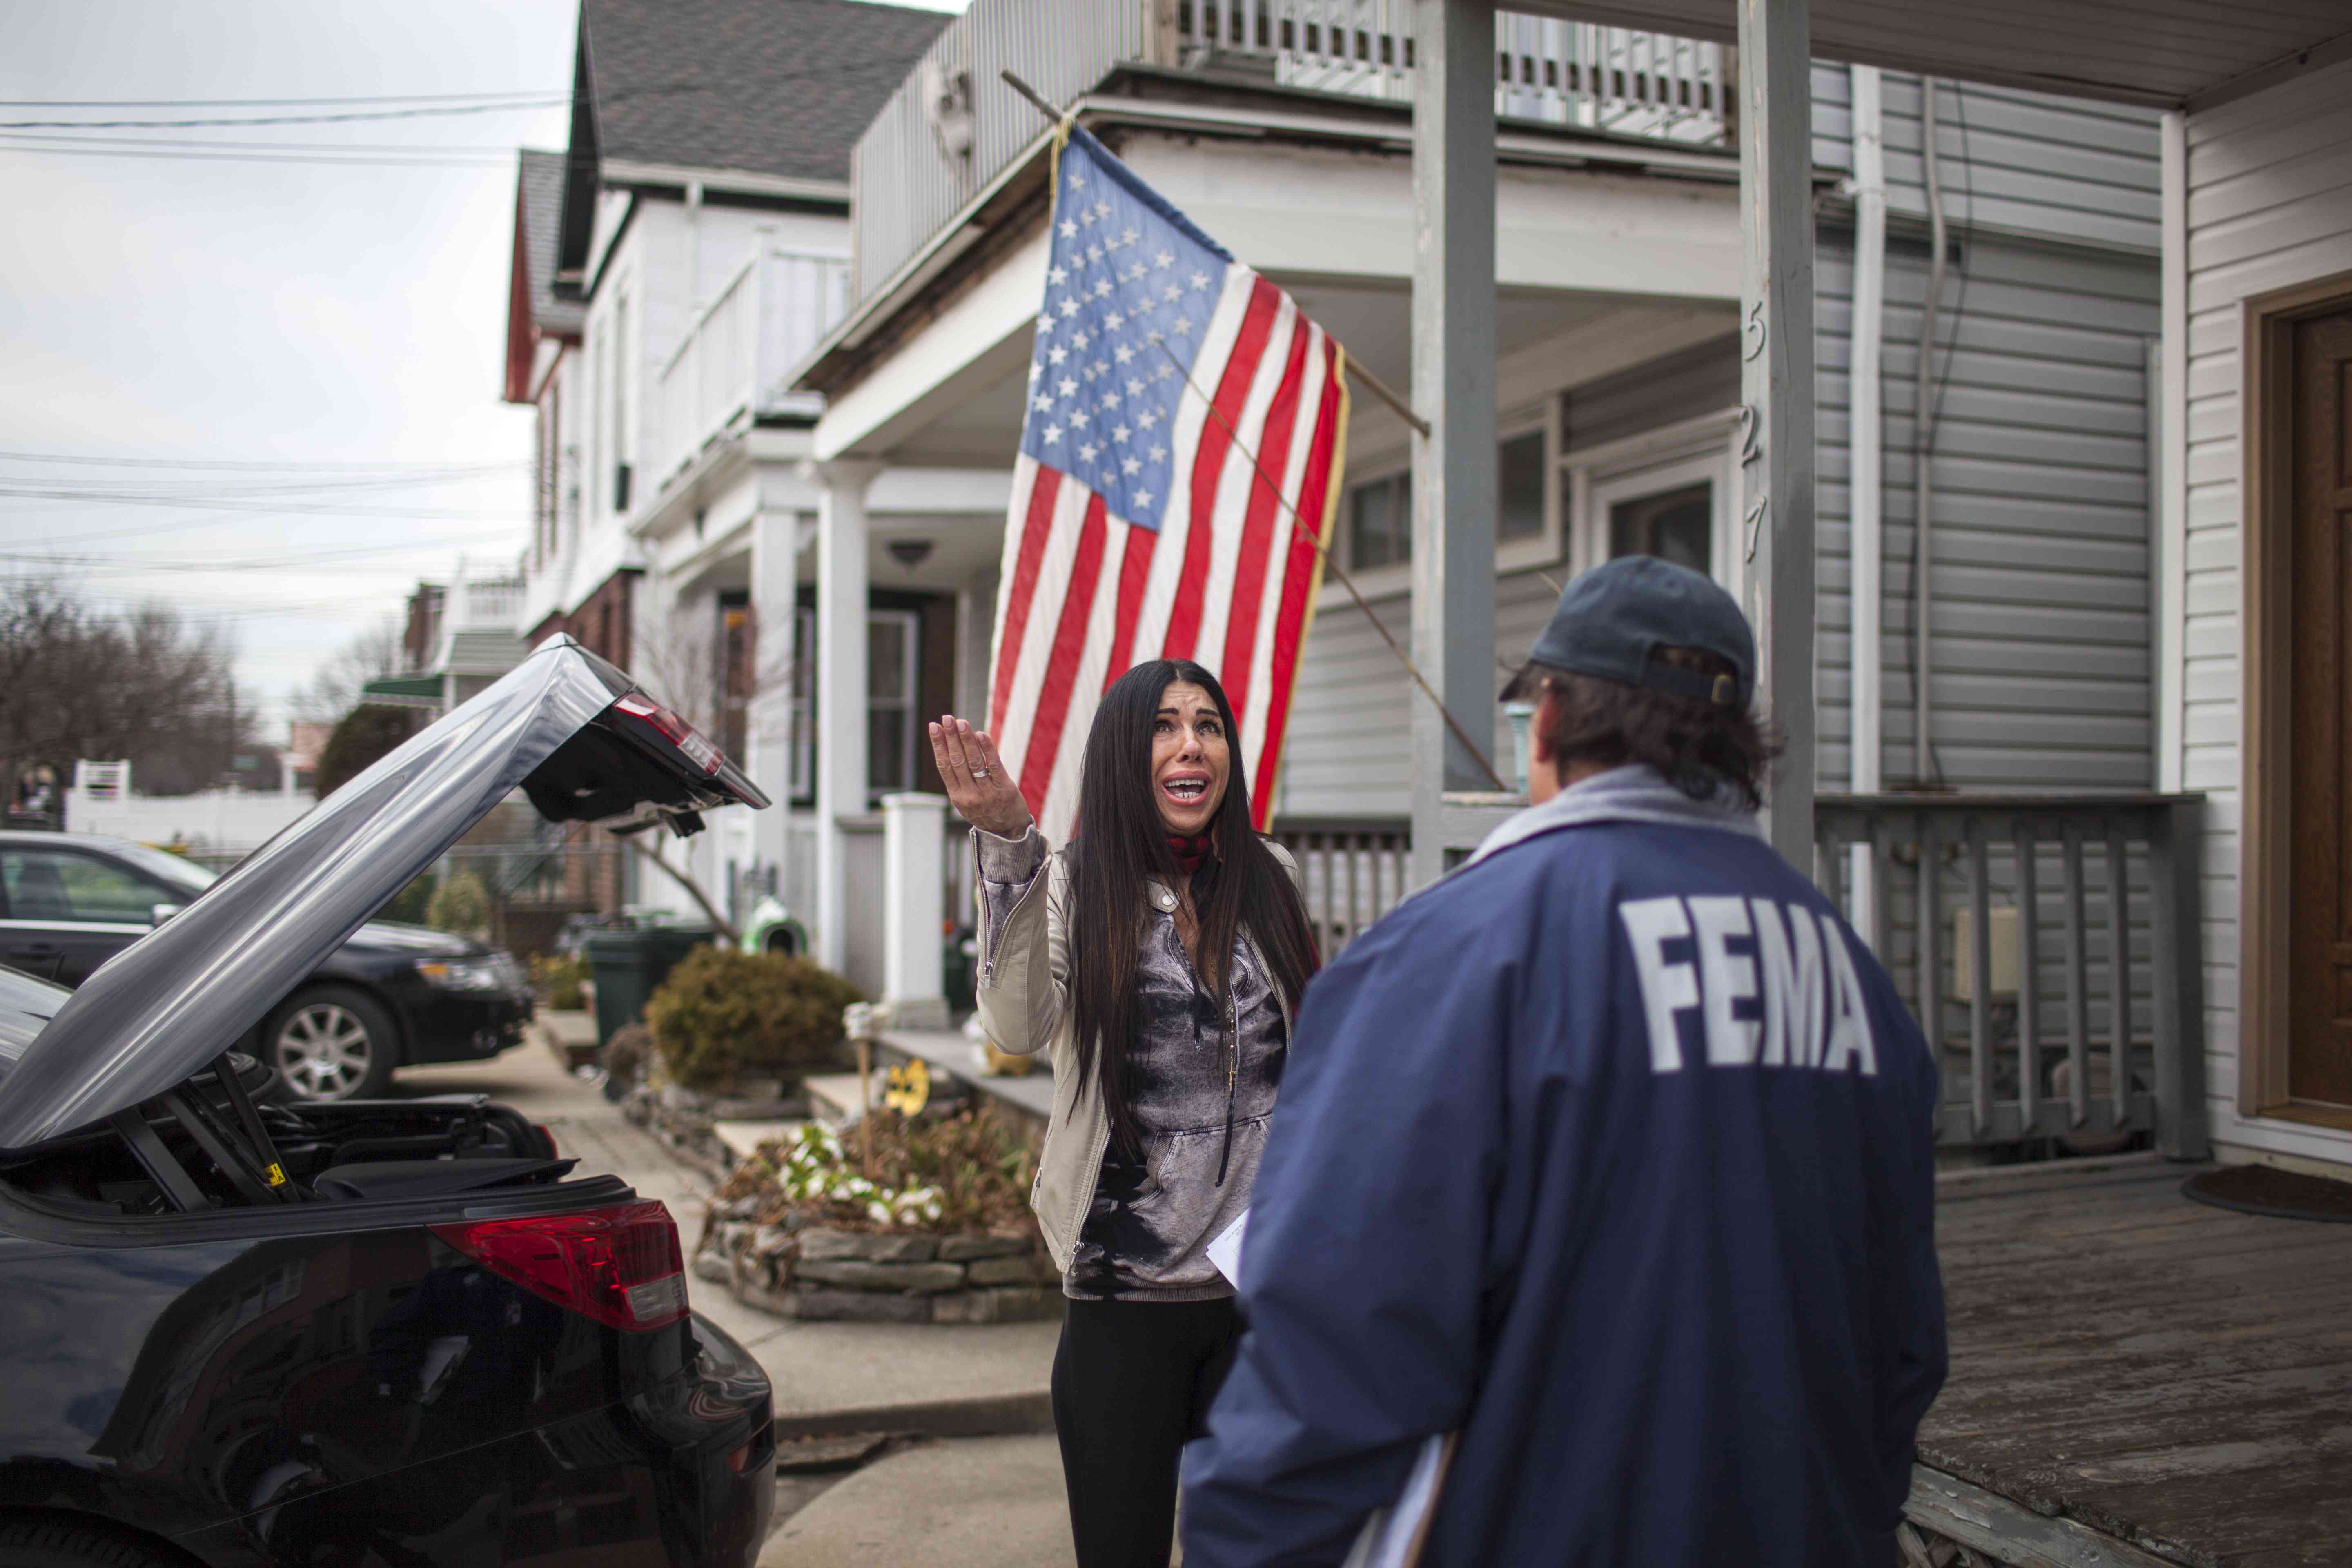 Federal Emergency Management Agency (FEMA) representative with resident affected by Hurricane Sandy in Queens, N.Y., in January 2013